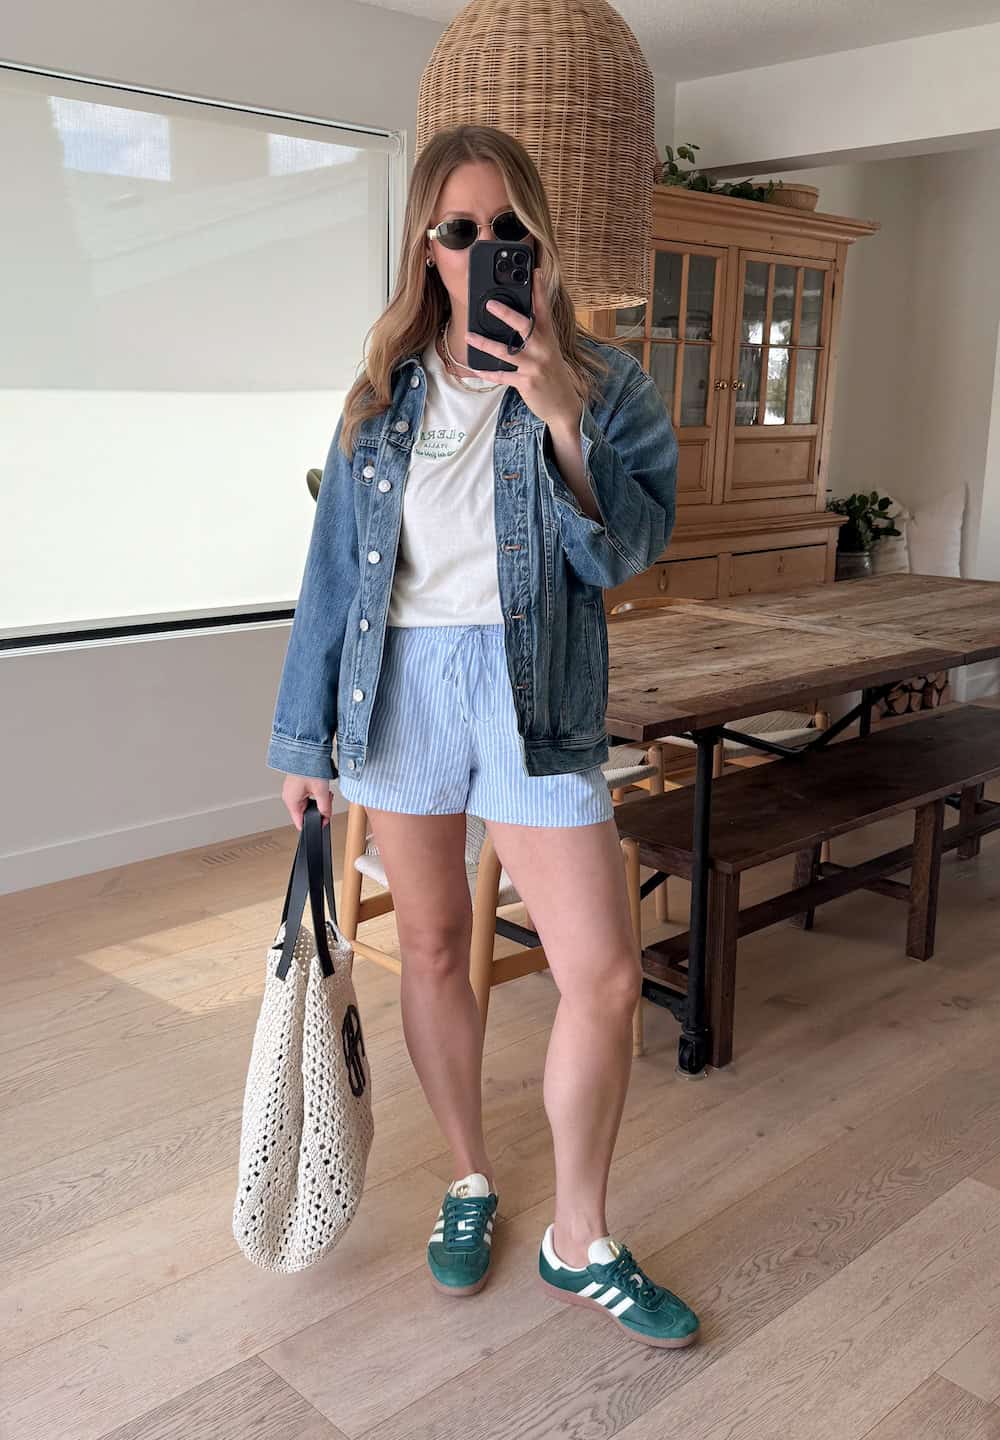 Christal wearing white and blue striped shorts, a t-shirt and a denim jacket with green sneakers.